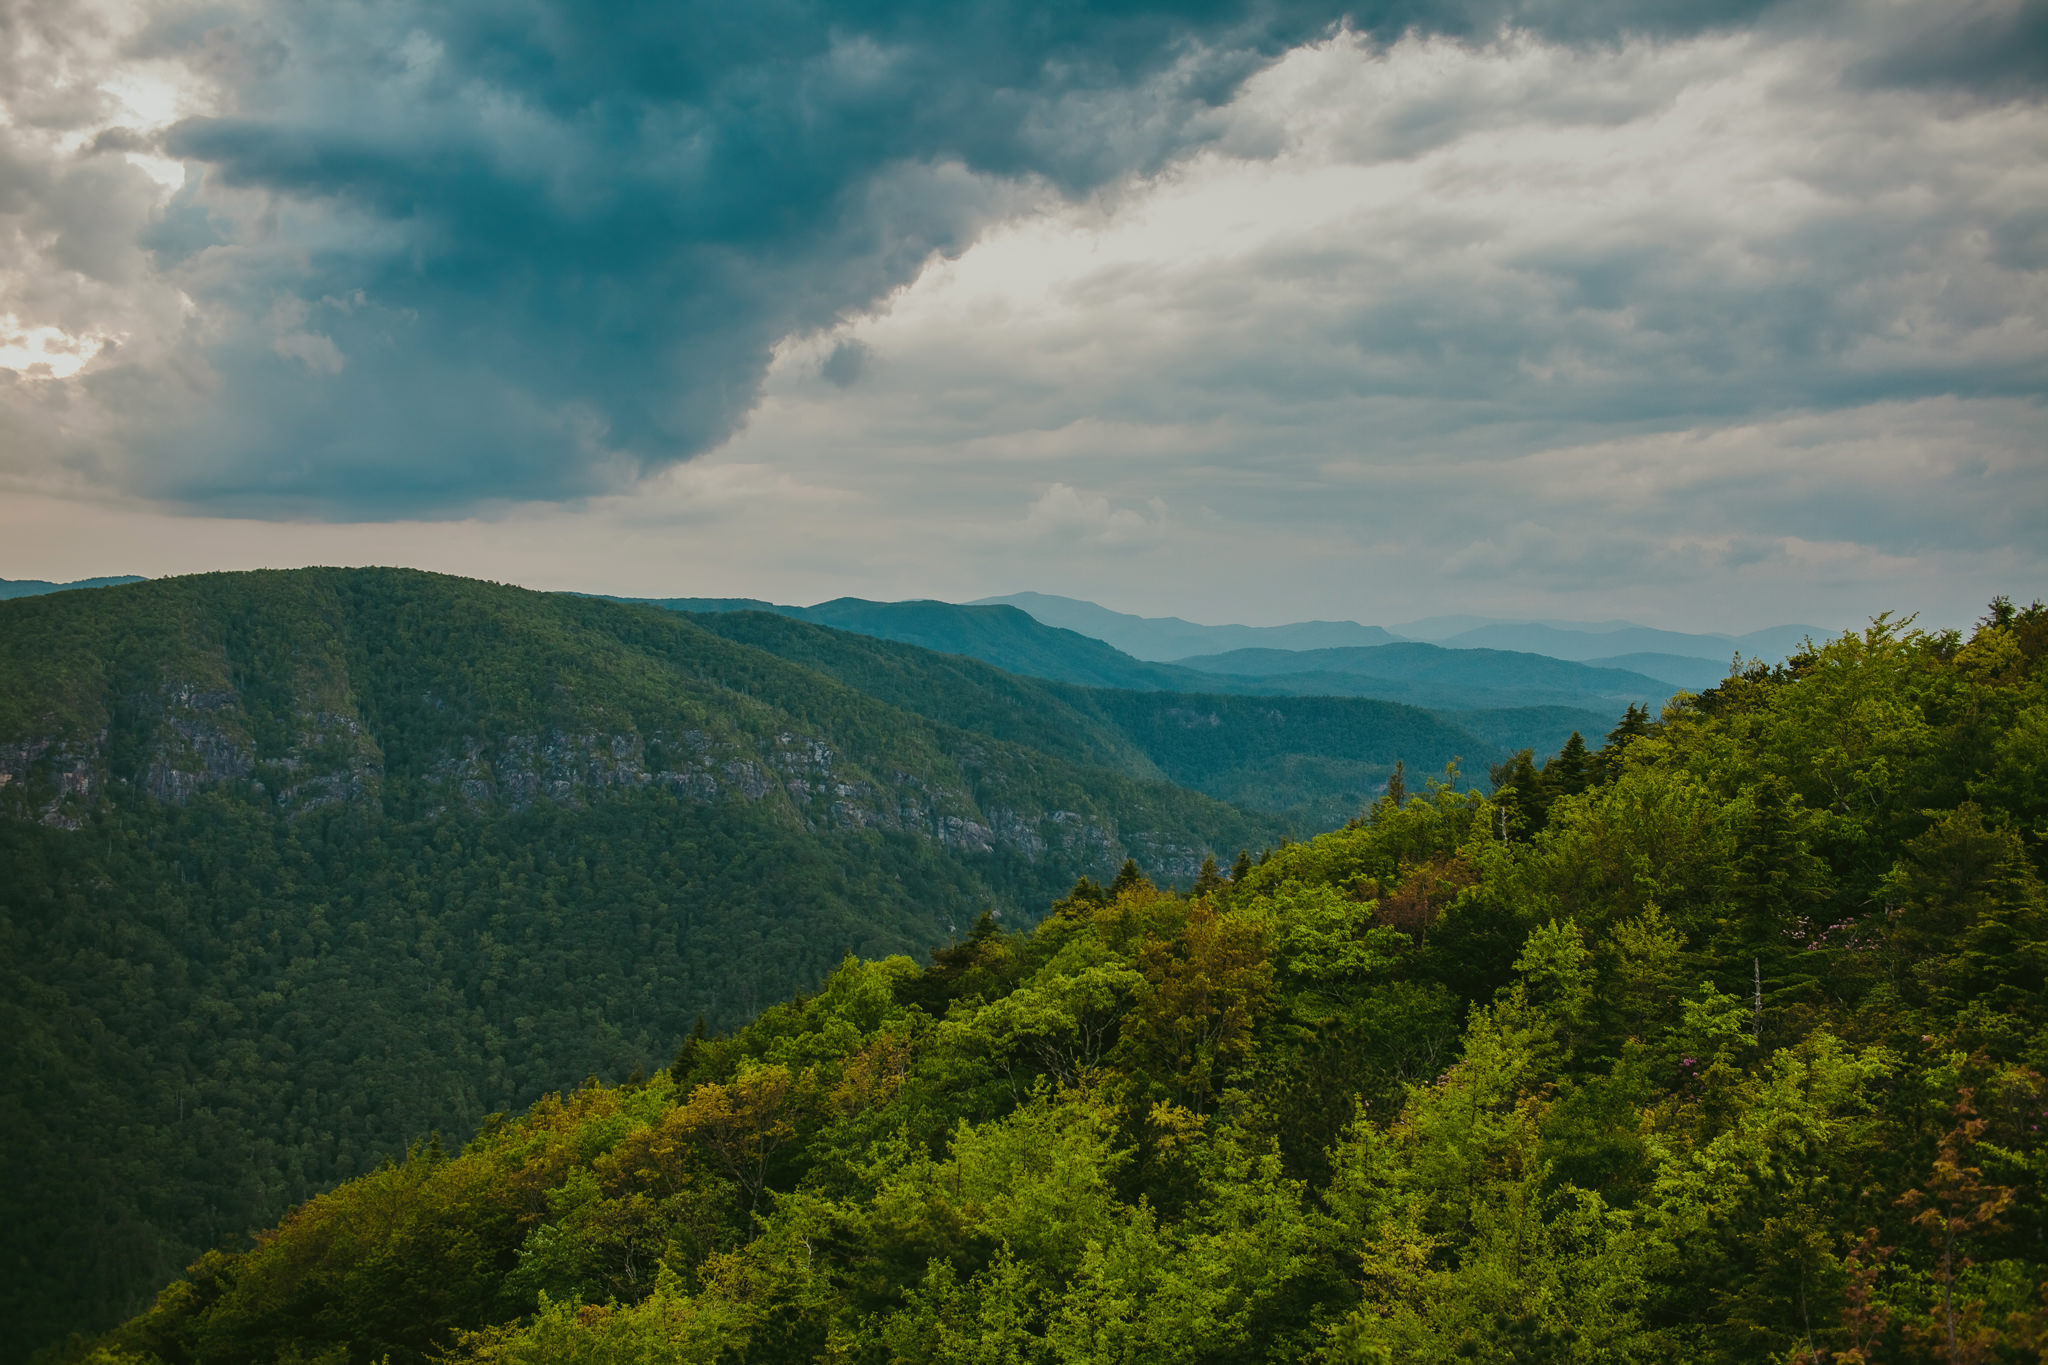 A gorgeous mountain view of the Linville Gorge from the Hawksbill Mountain trail near Linville, NC photography by Mabyn Ludke